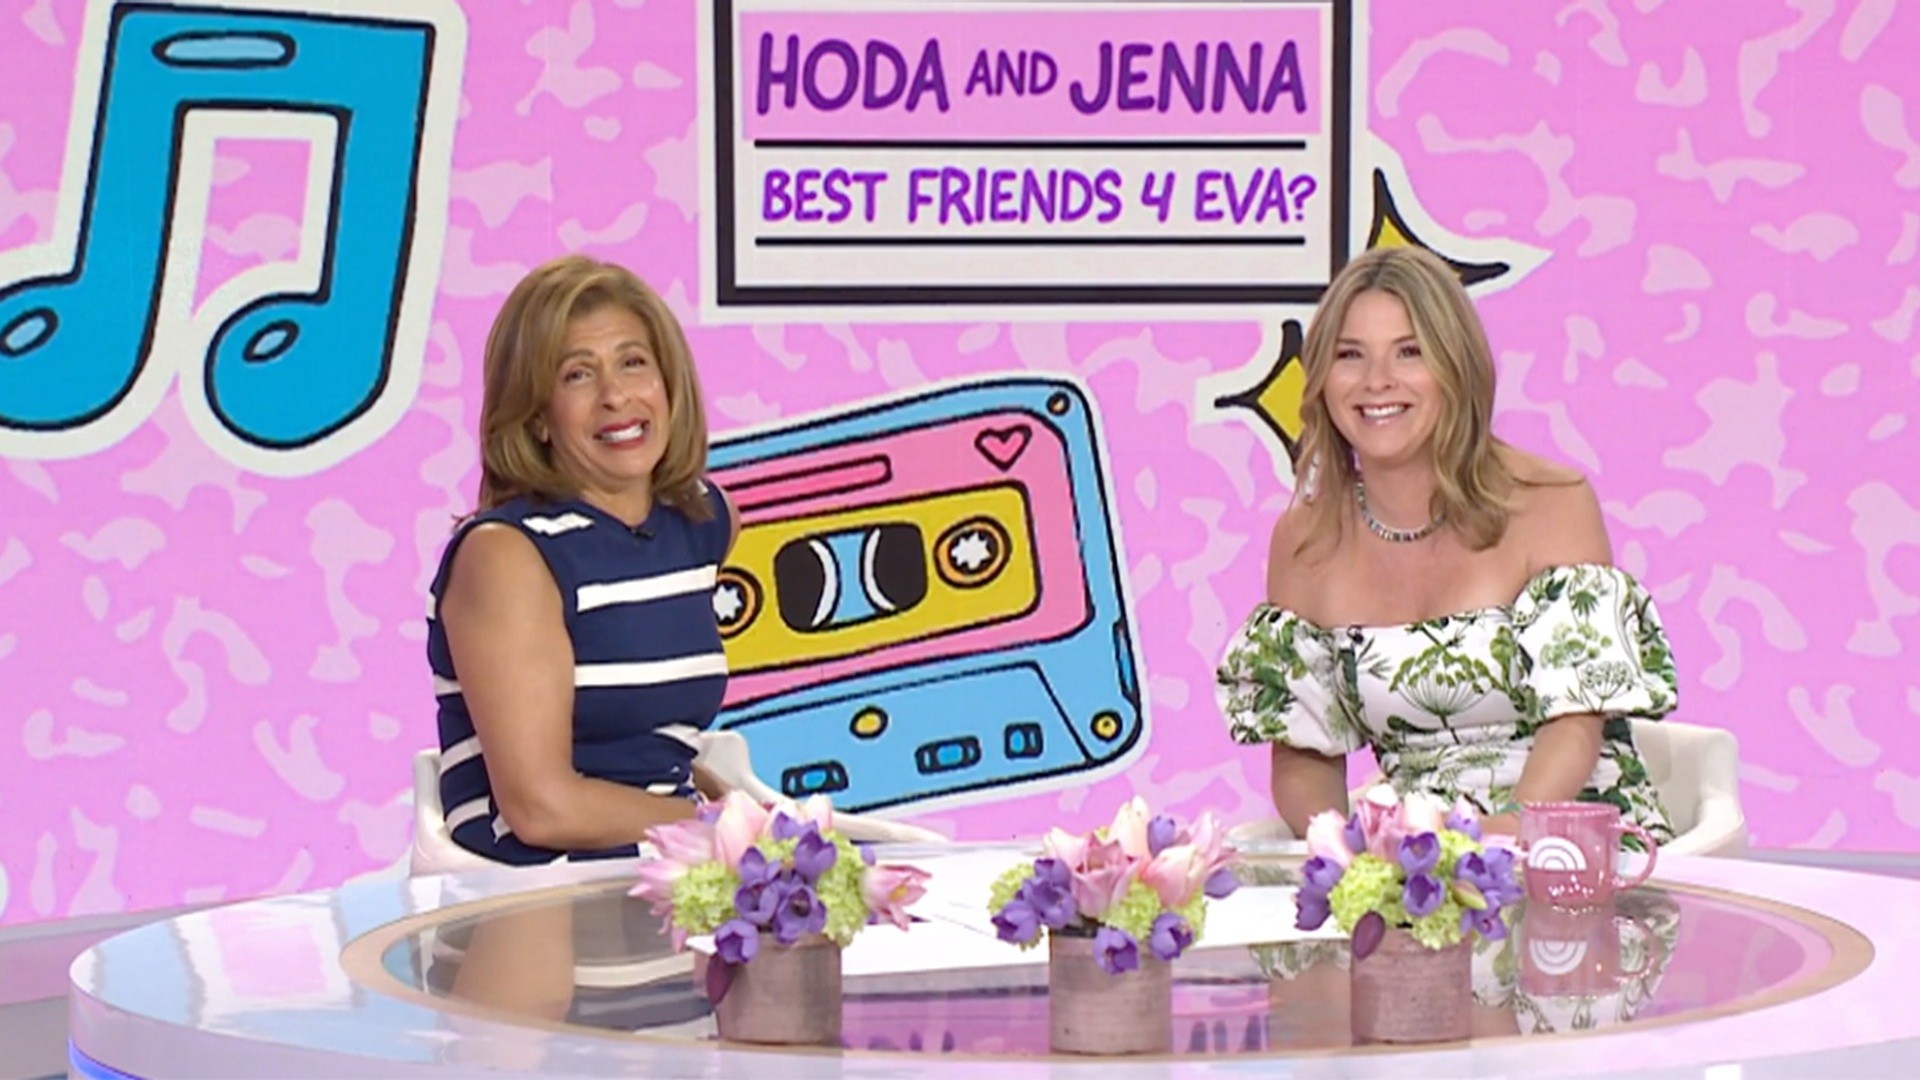 BF4E? Hoda & Jenna answer questions about each other!